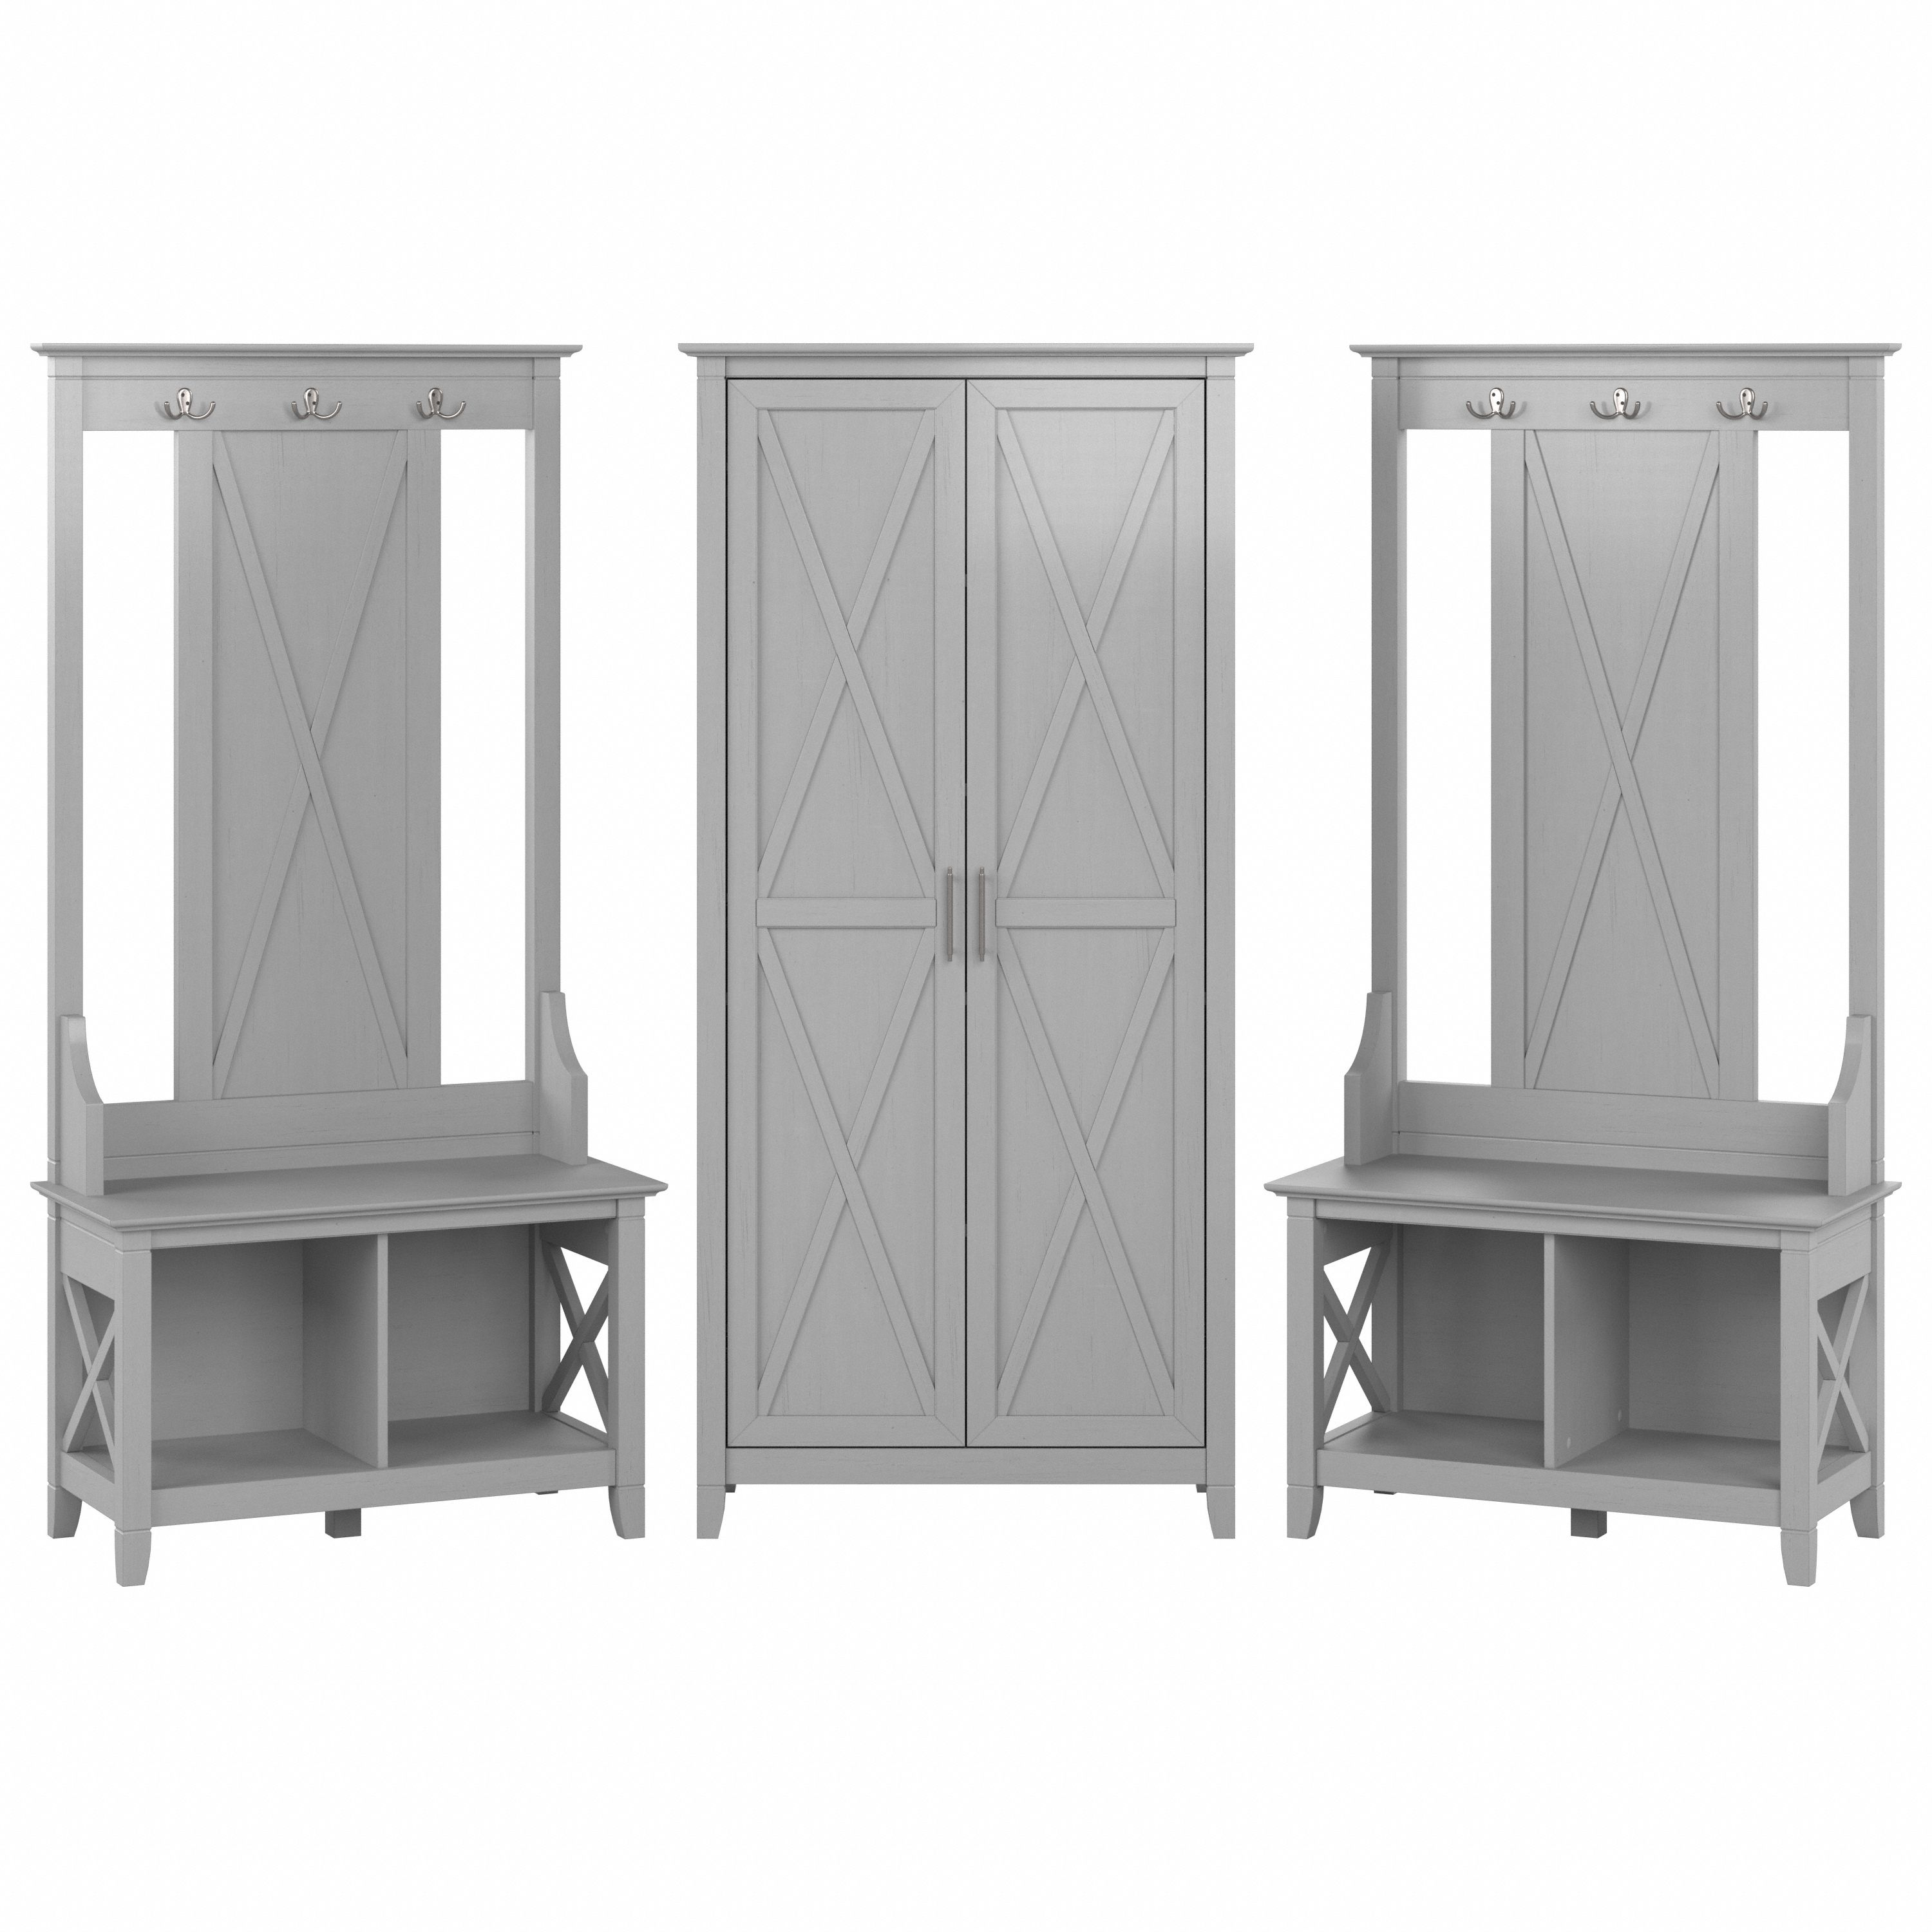 Shop Bush Furniture Key West Entryway Storage Set with Hall Tree, Shoe Bench and Tall Cabinet 02 KWS057CG #color_cape cod gray